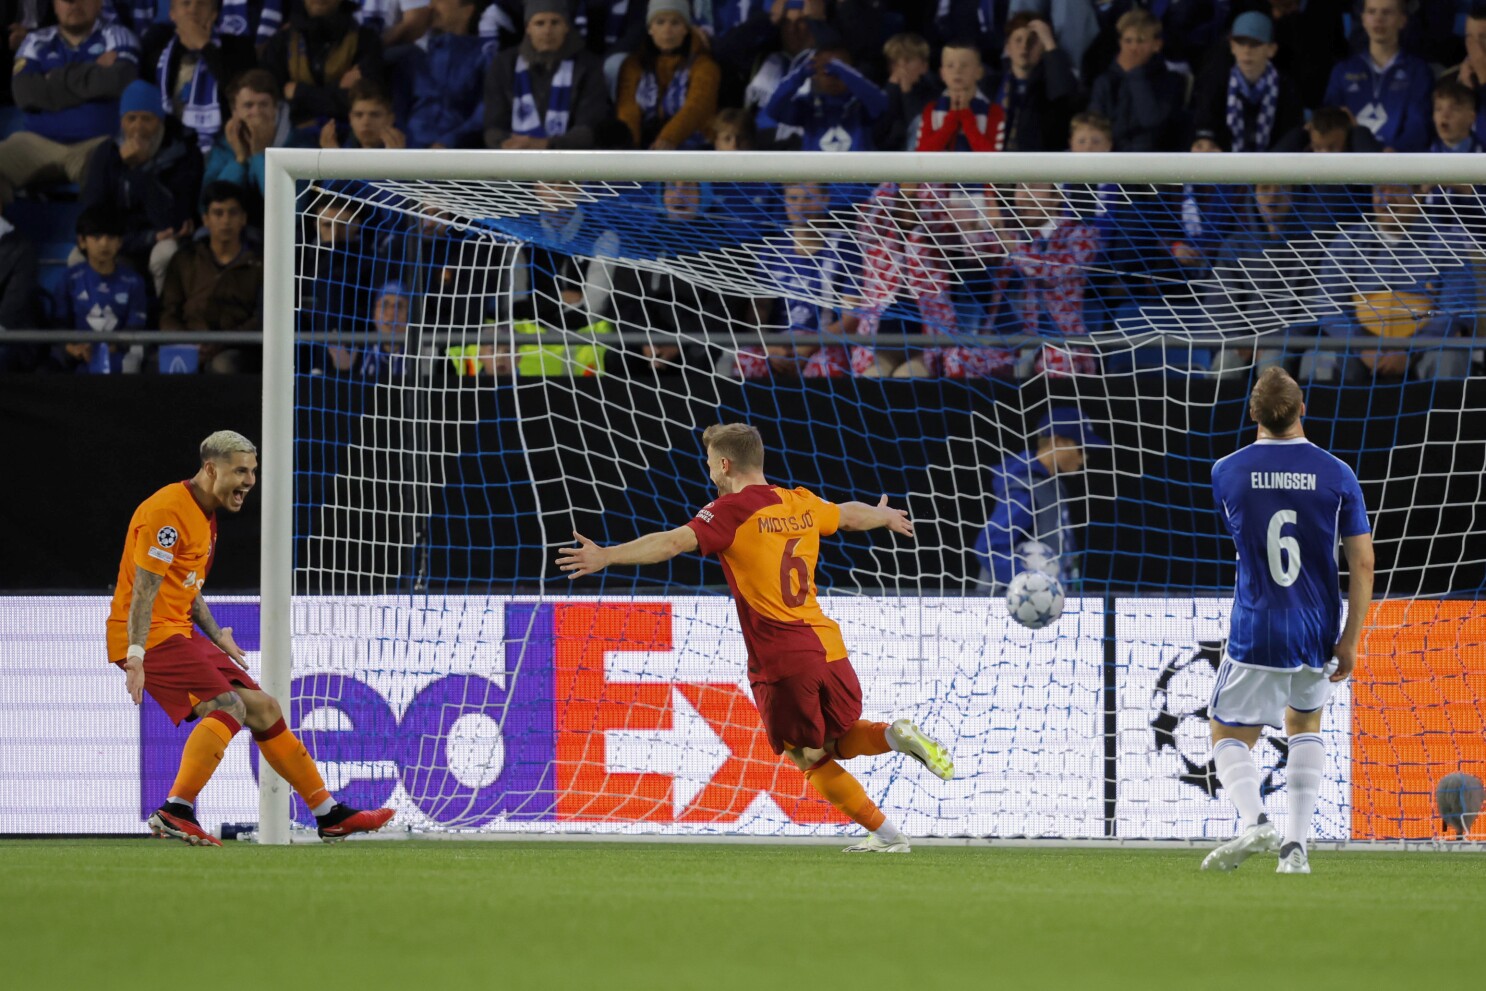 Mauro Icardi's goal and late assist lift Galatasaray to 3-2 win at Molde in  Champions League playoff